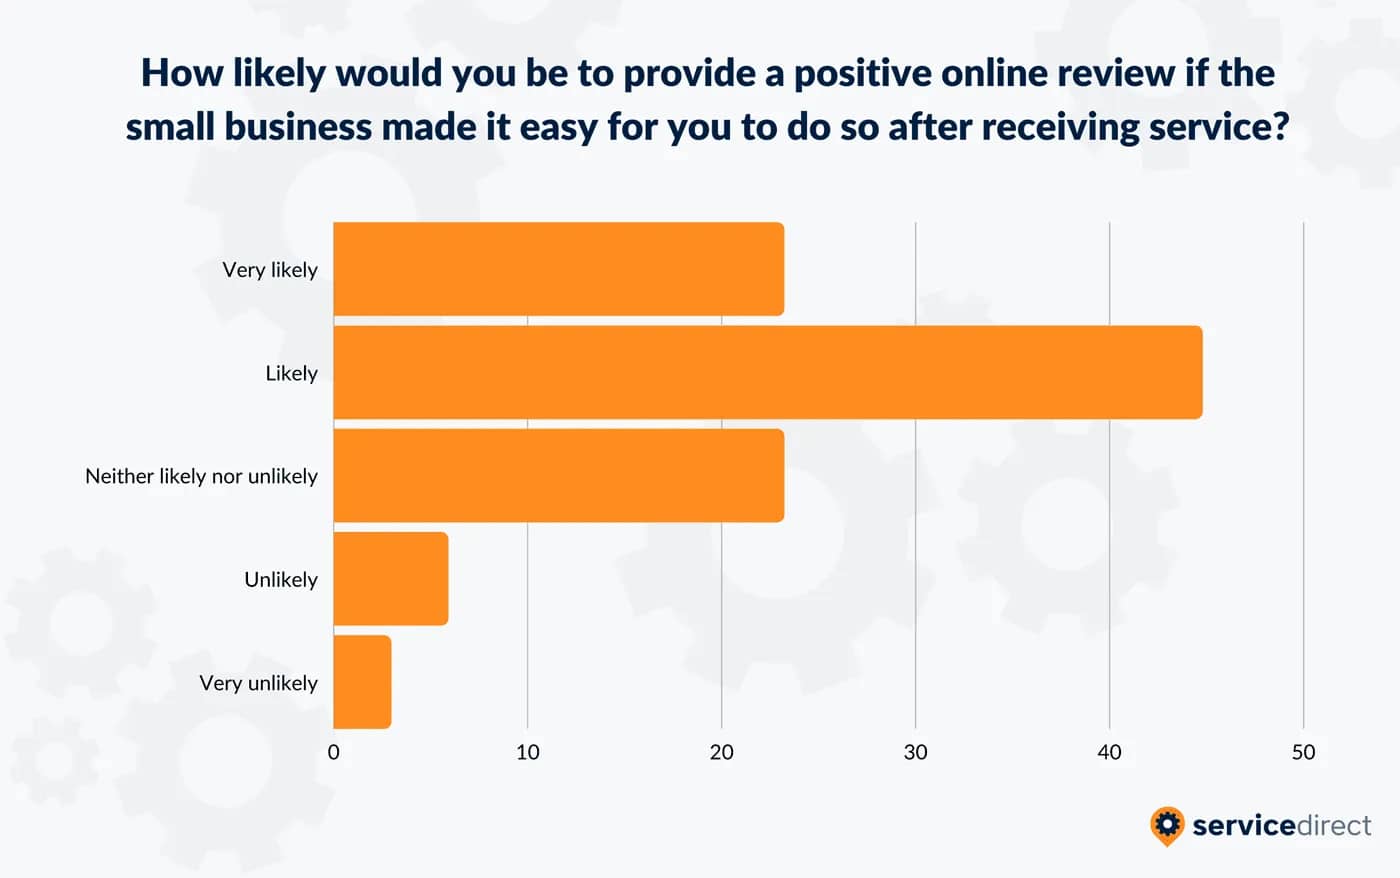 71% of consumers are likely to leave a positive review if a company makes it easy for them to do so. 